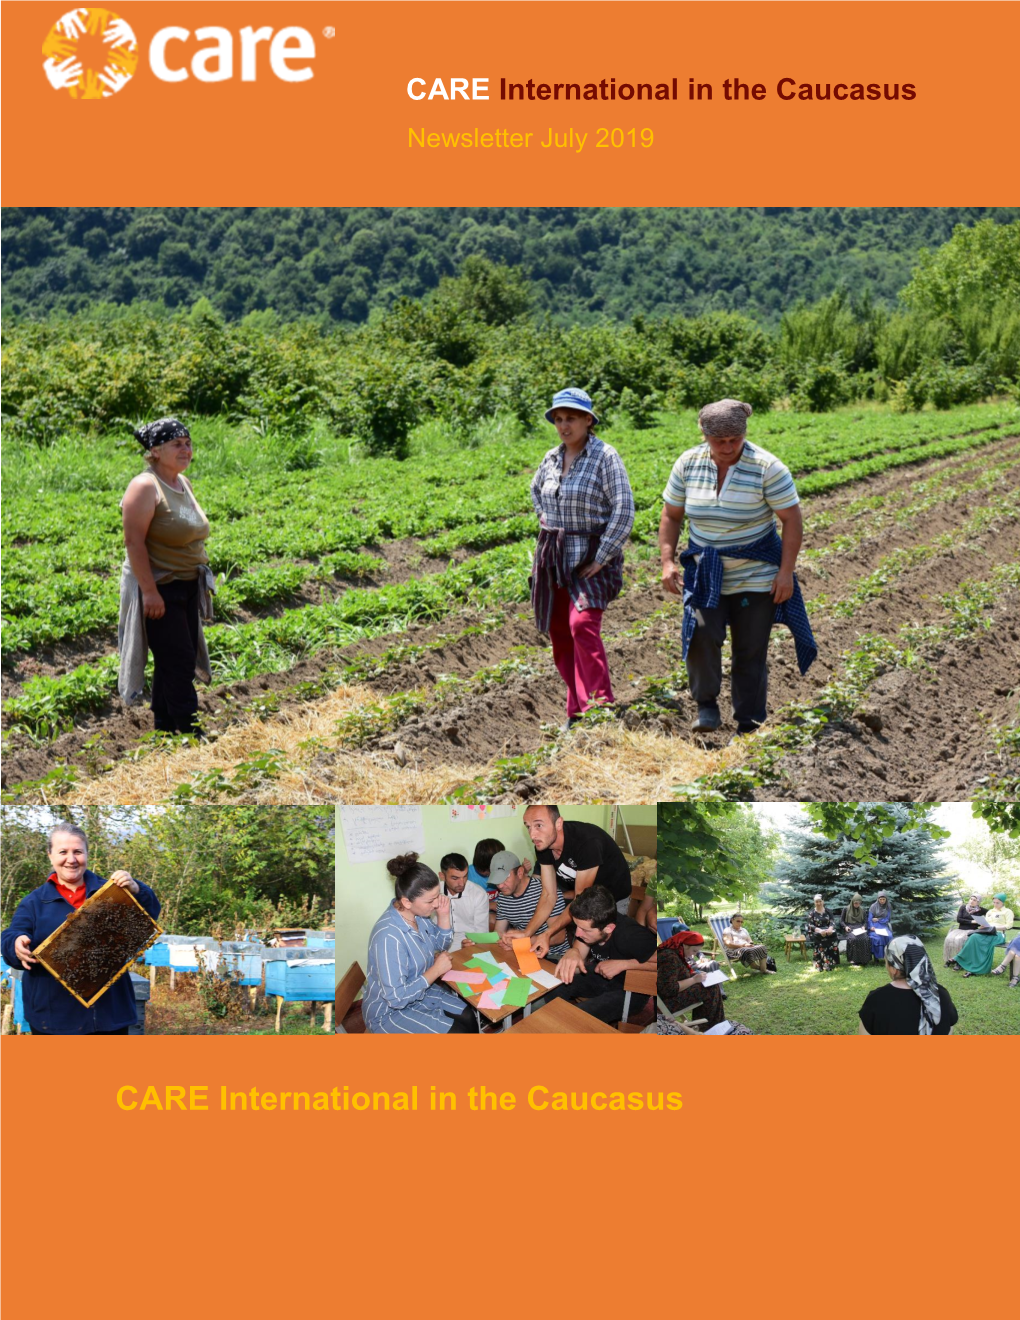 CARE International in the Caucasus Newsletter July 2019